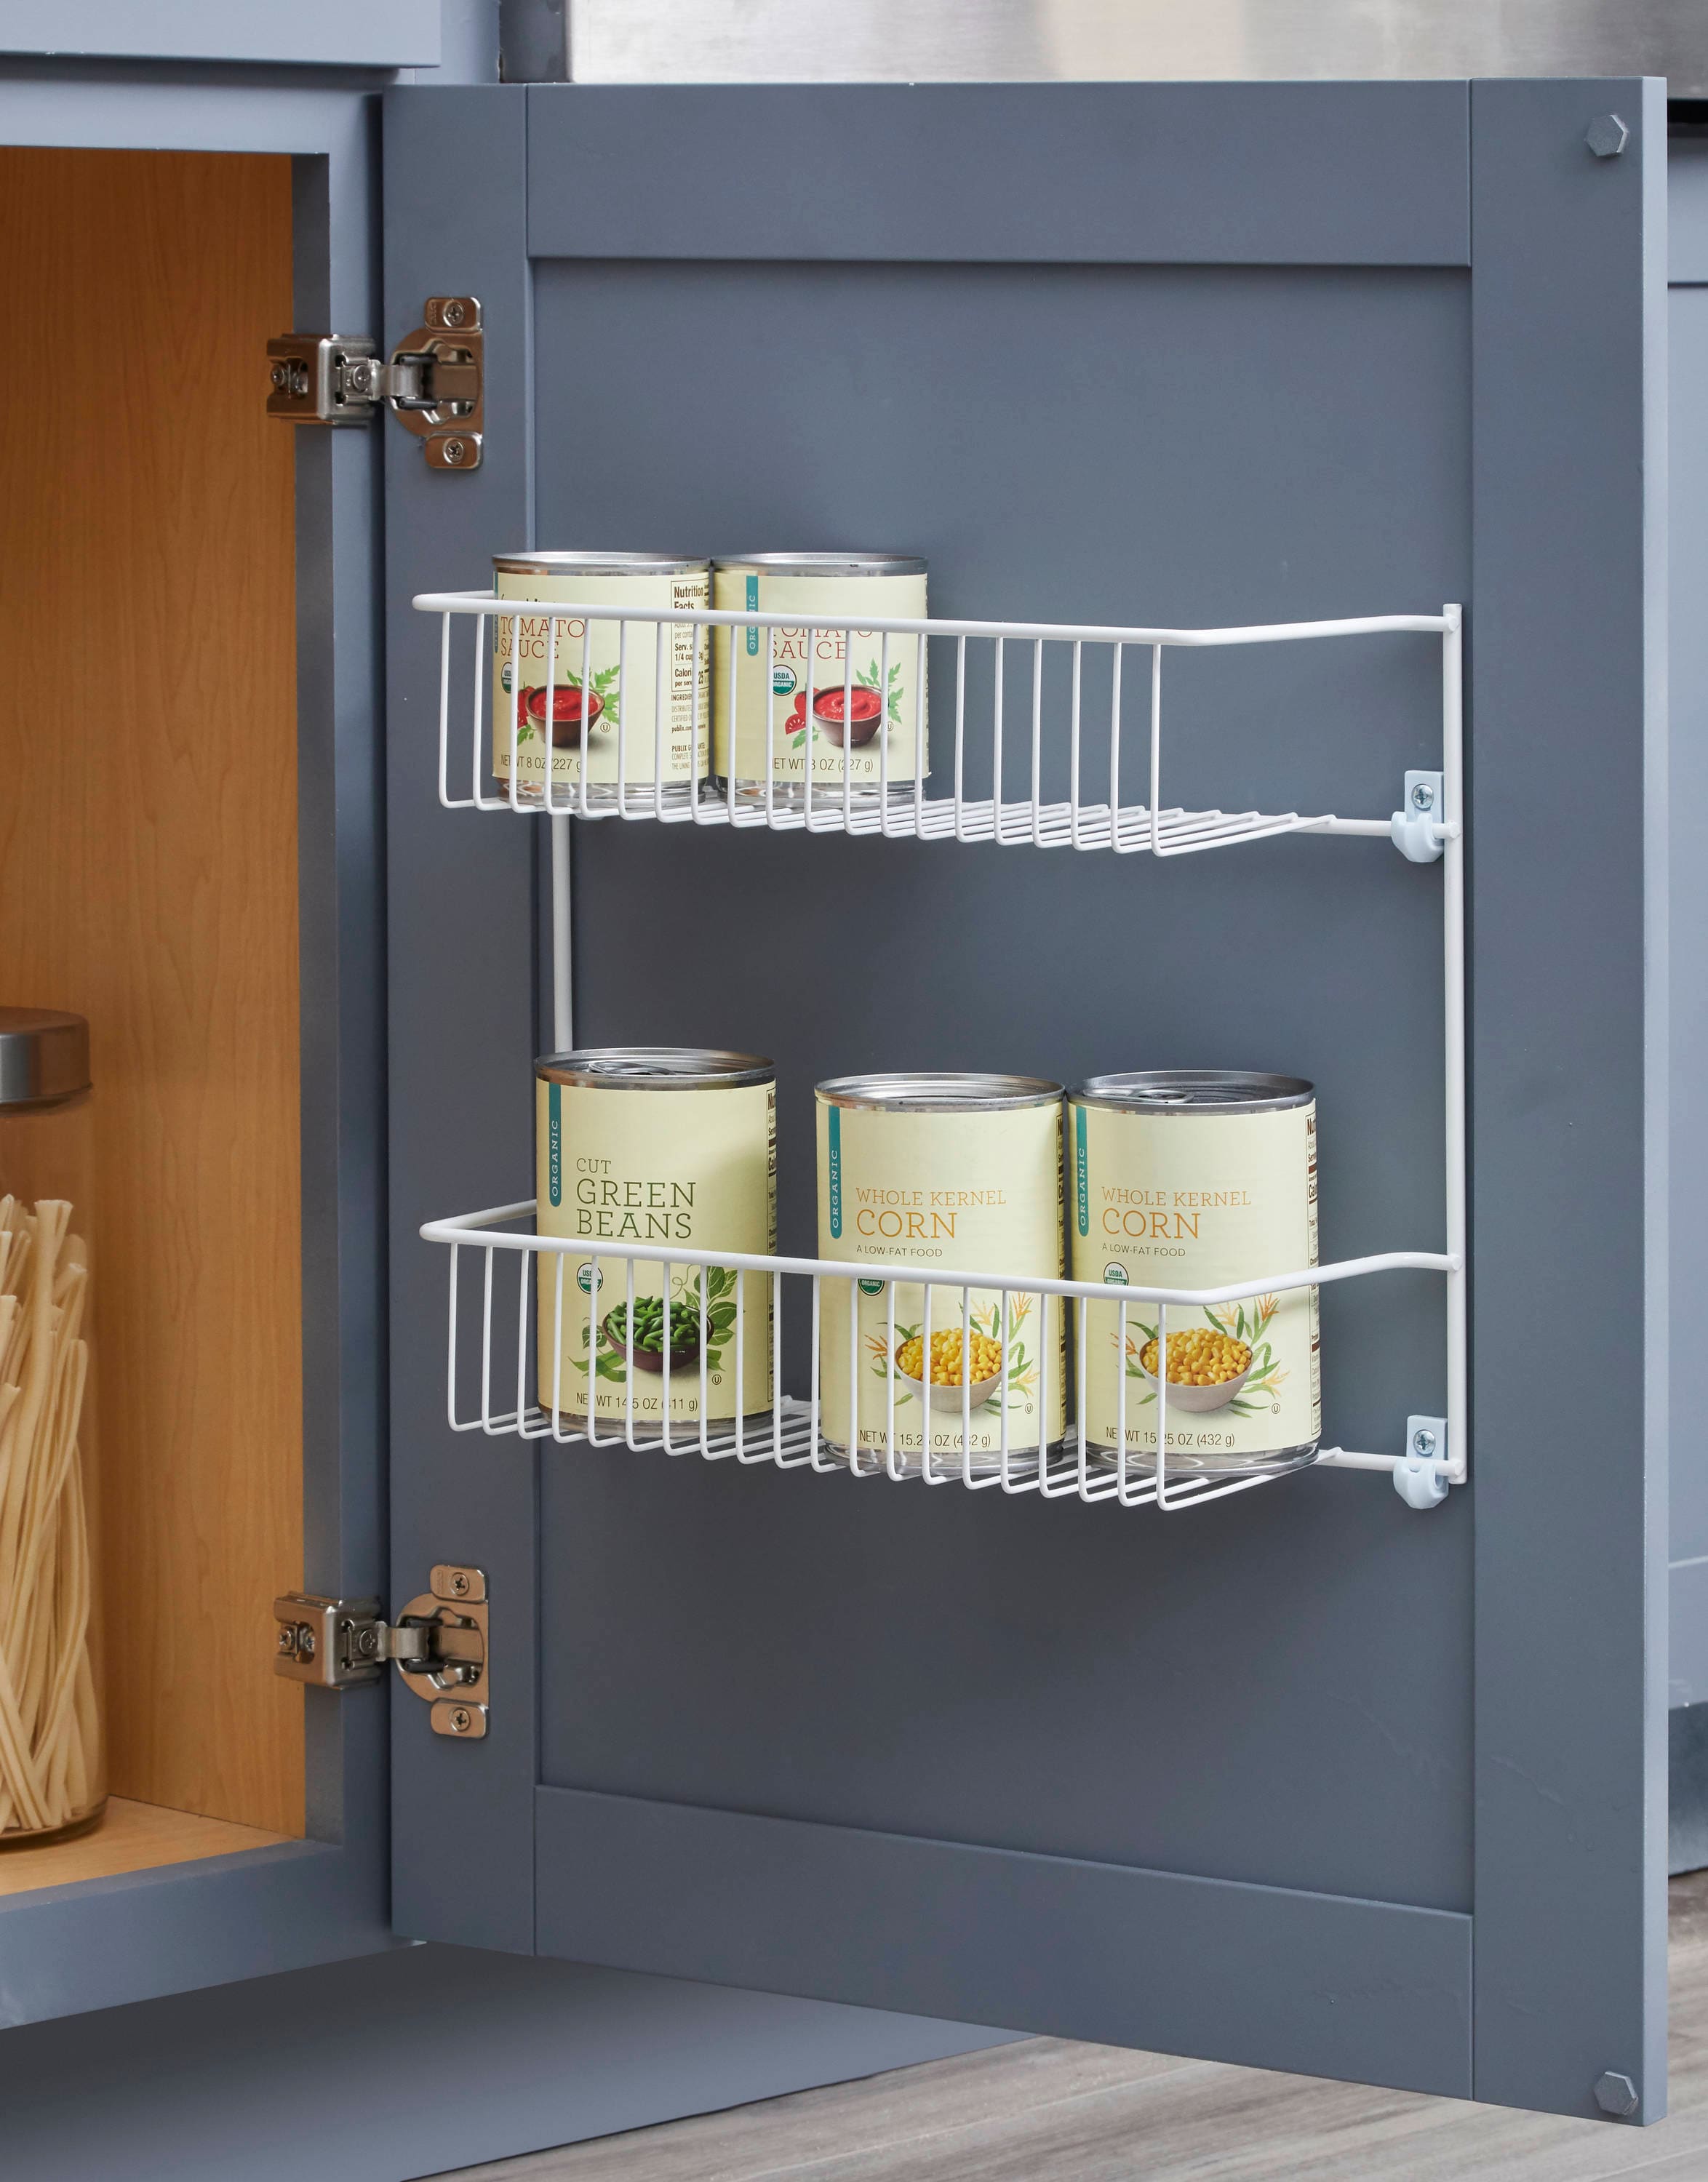 7.5 in. W x 21 in. D Wood Pull Out Organizer Rack for Narrow Cabinet